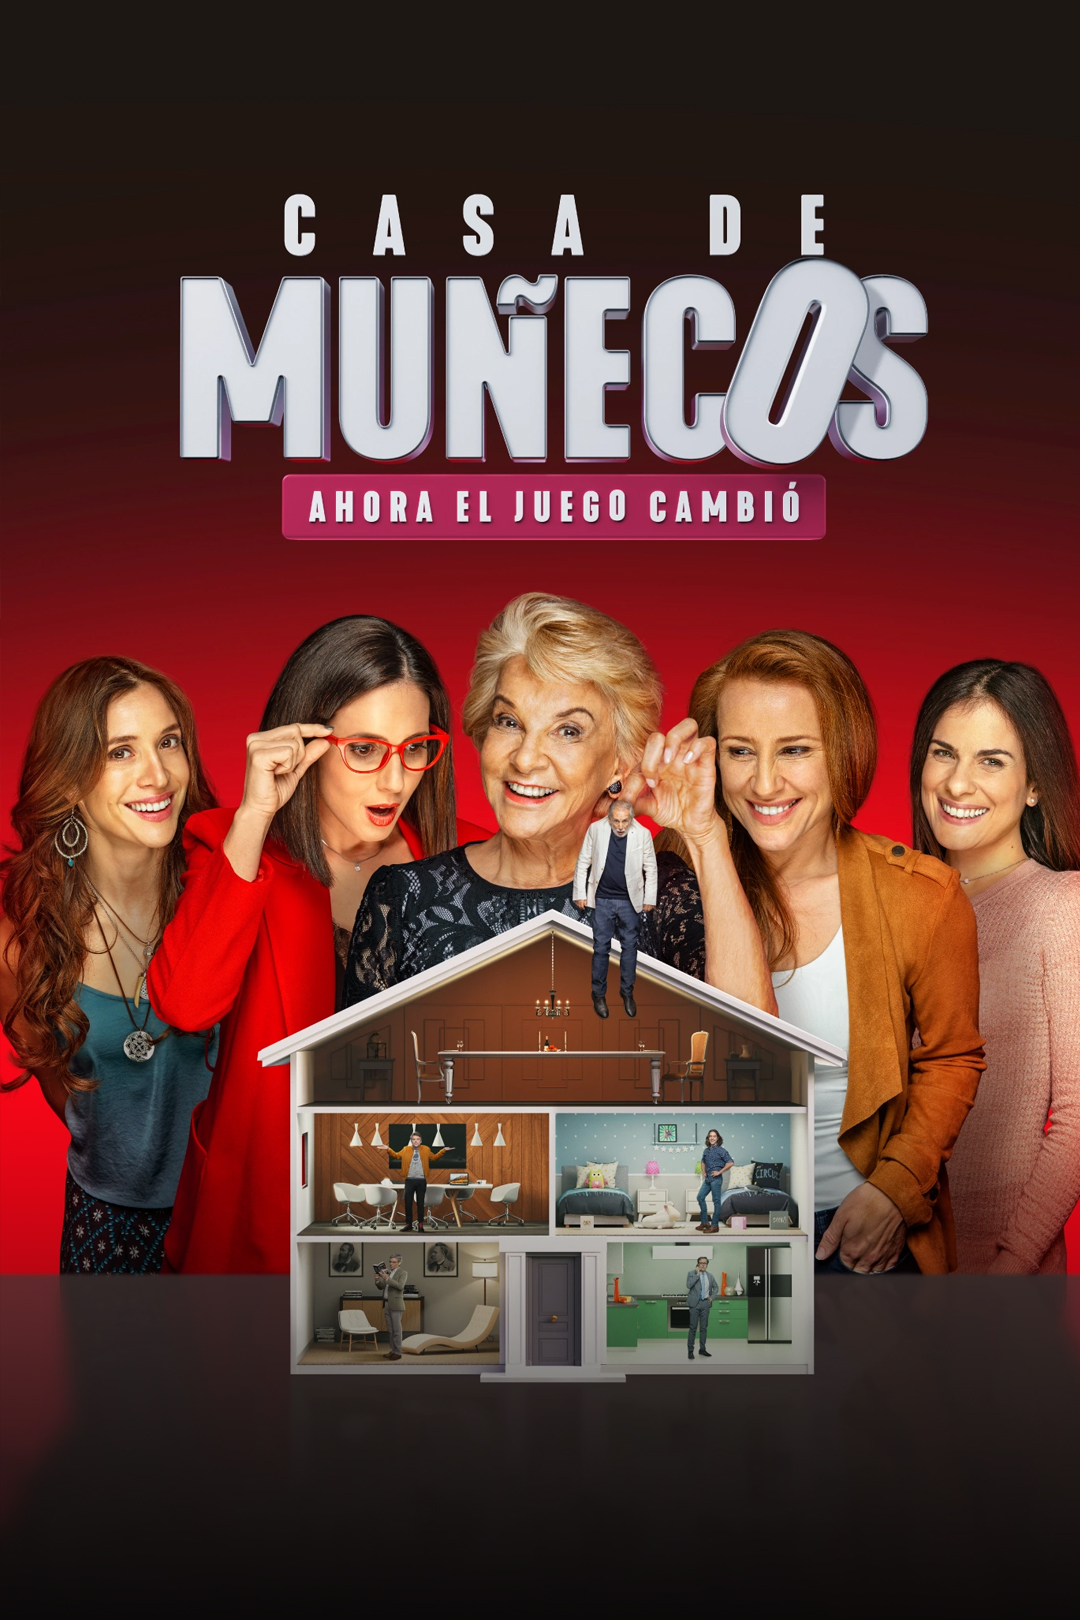 Casa de Muñecos is a Chilean telenovela which revolves around the Falco sisters, who will discover why their mother abandoned their father after more than 50 years of marriage.  